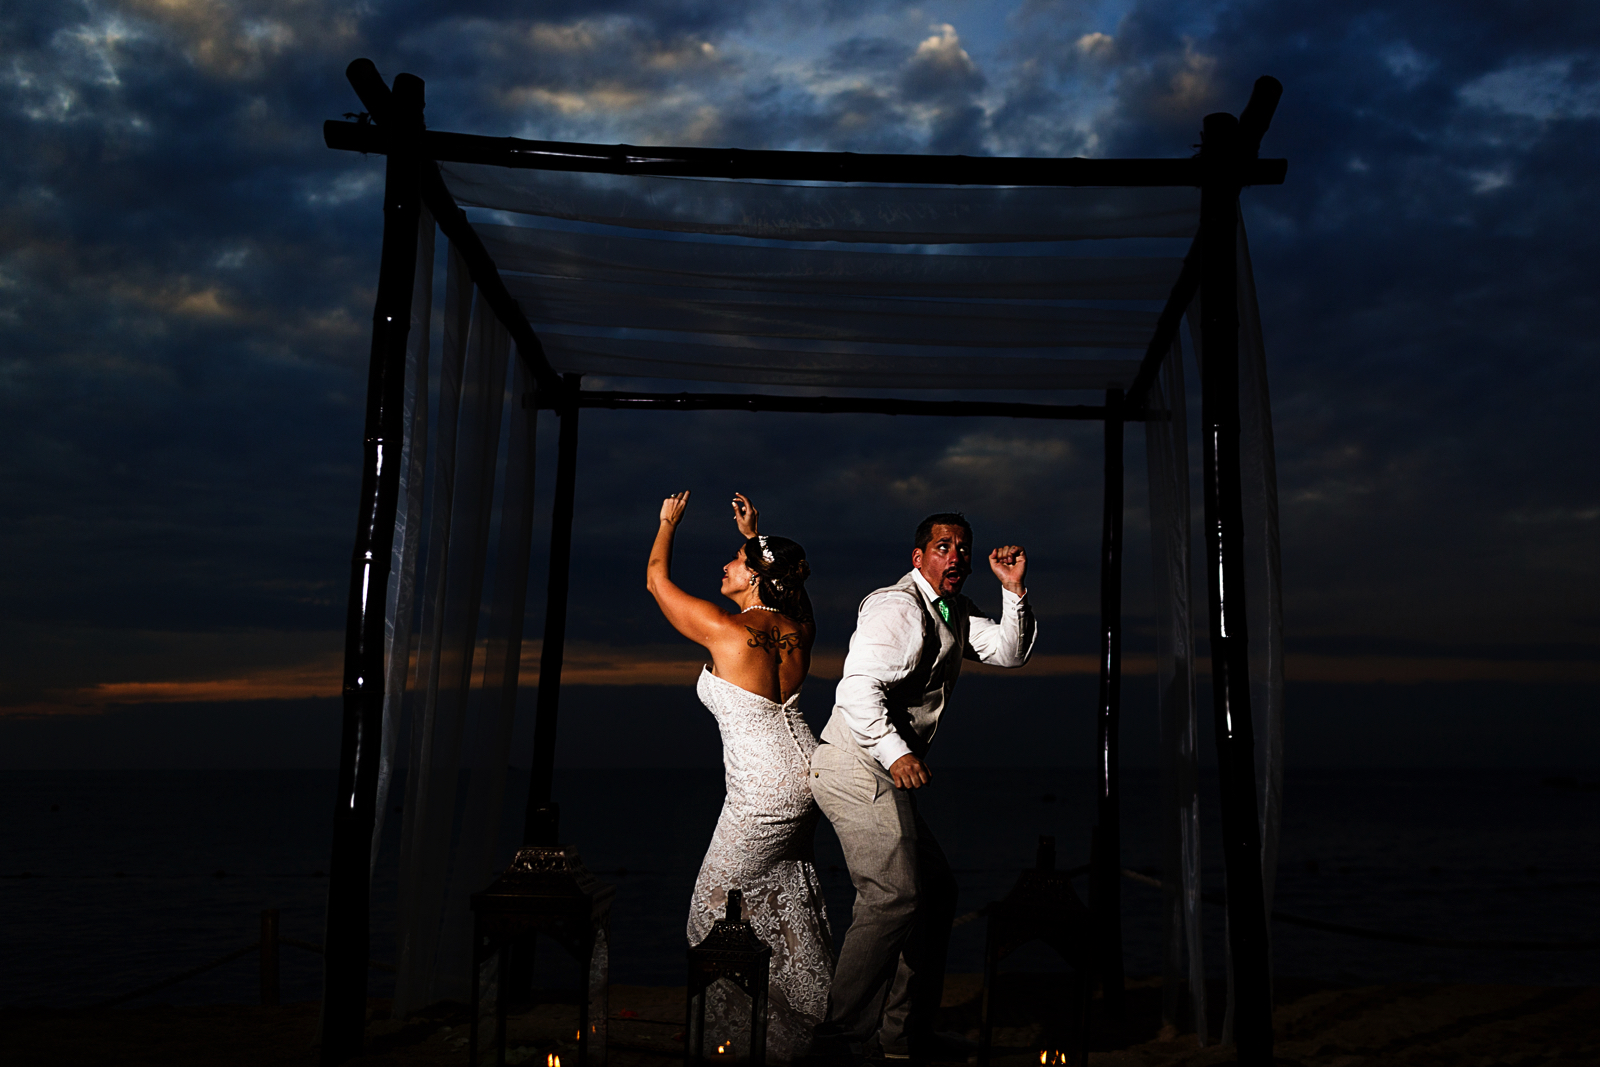 Portrait of the couple dancing under the chuppah at sunset on the beach